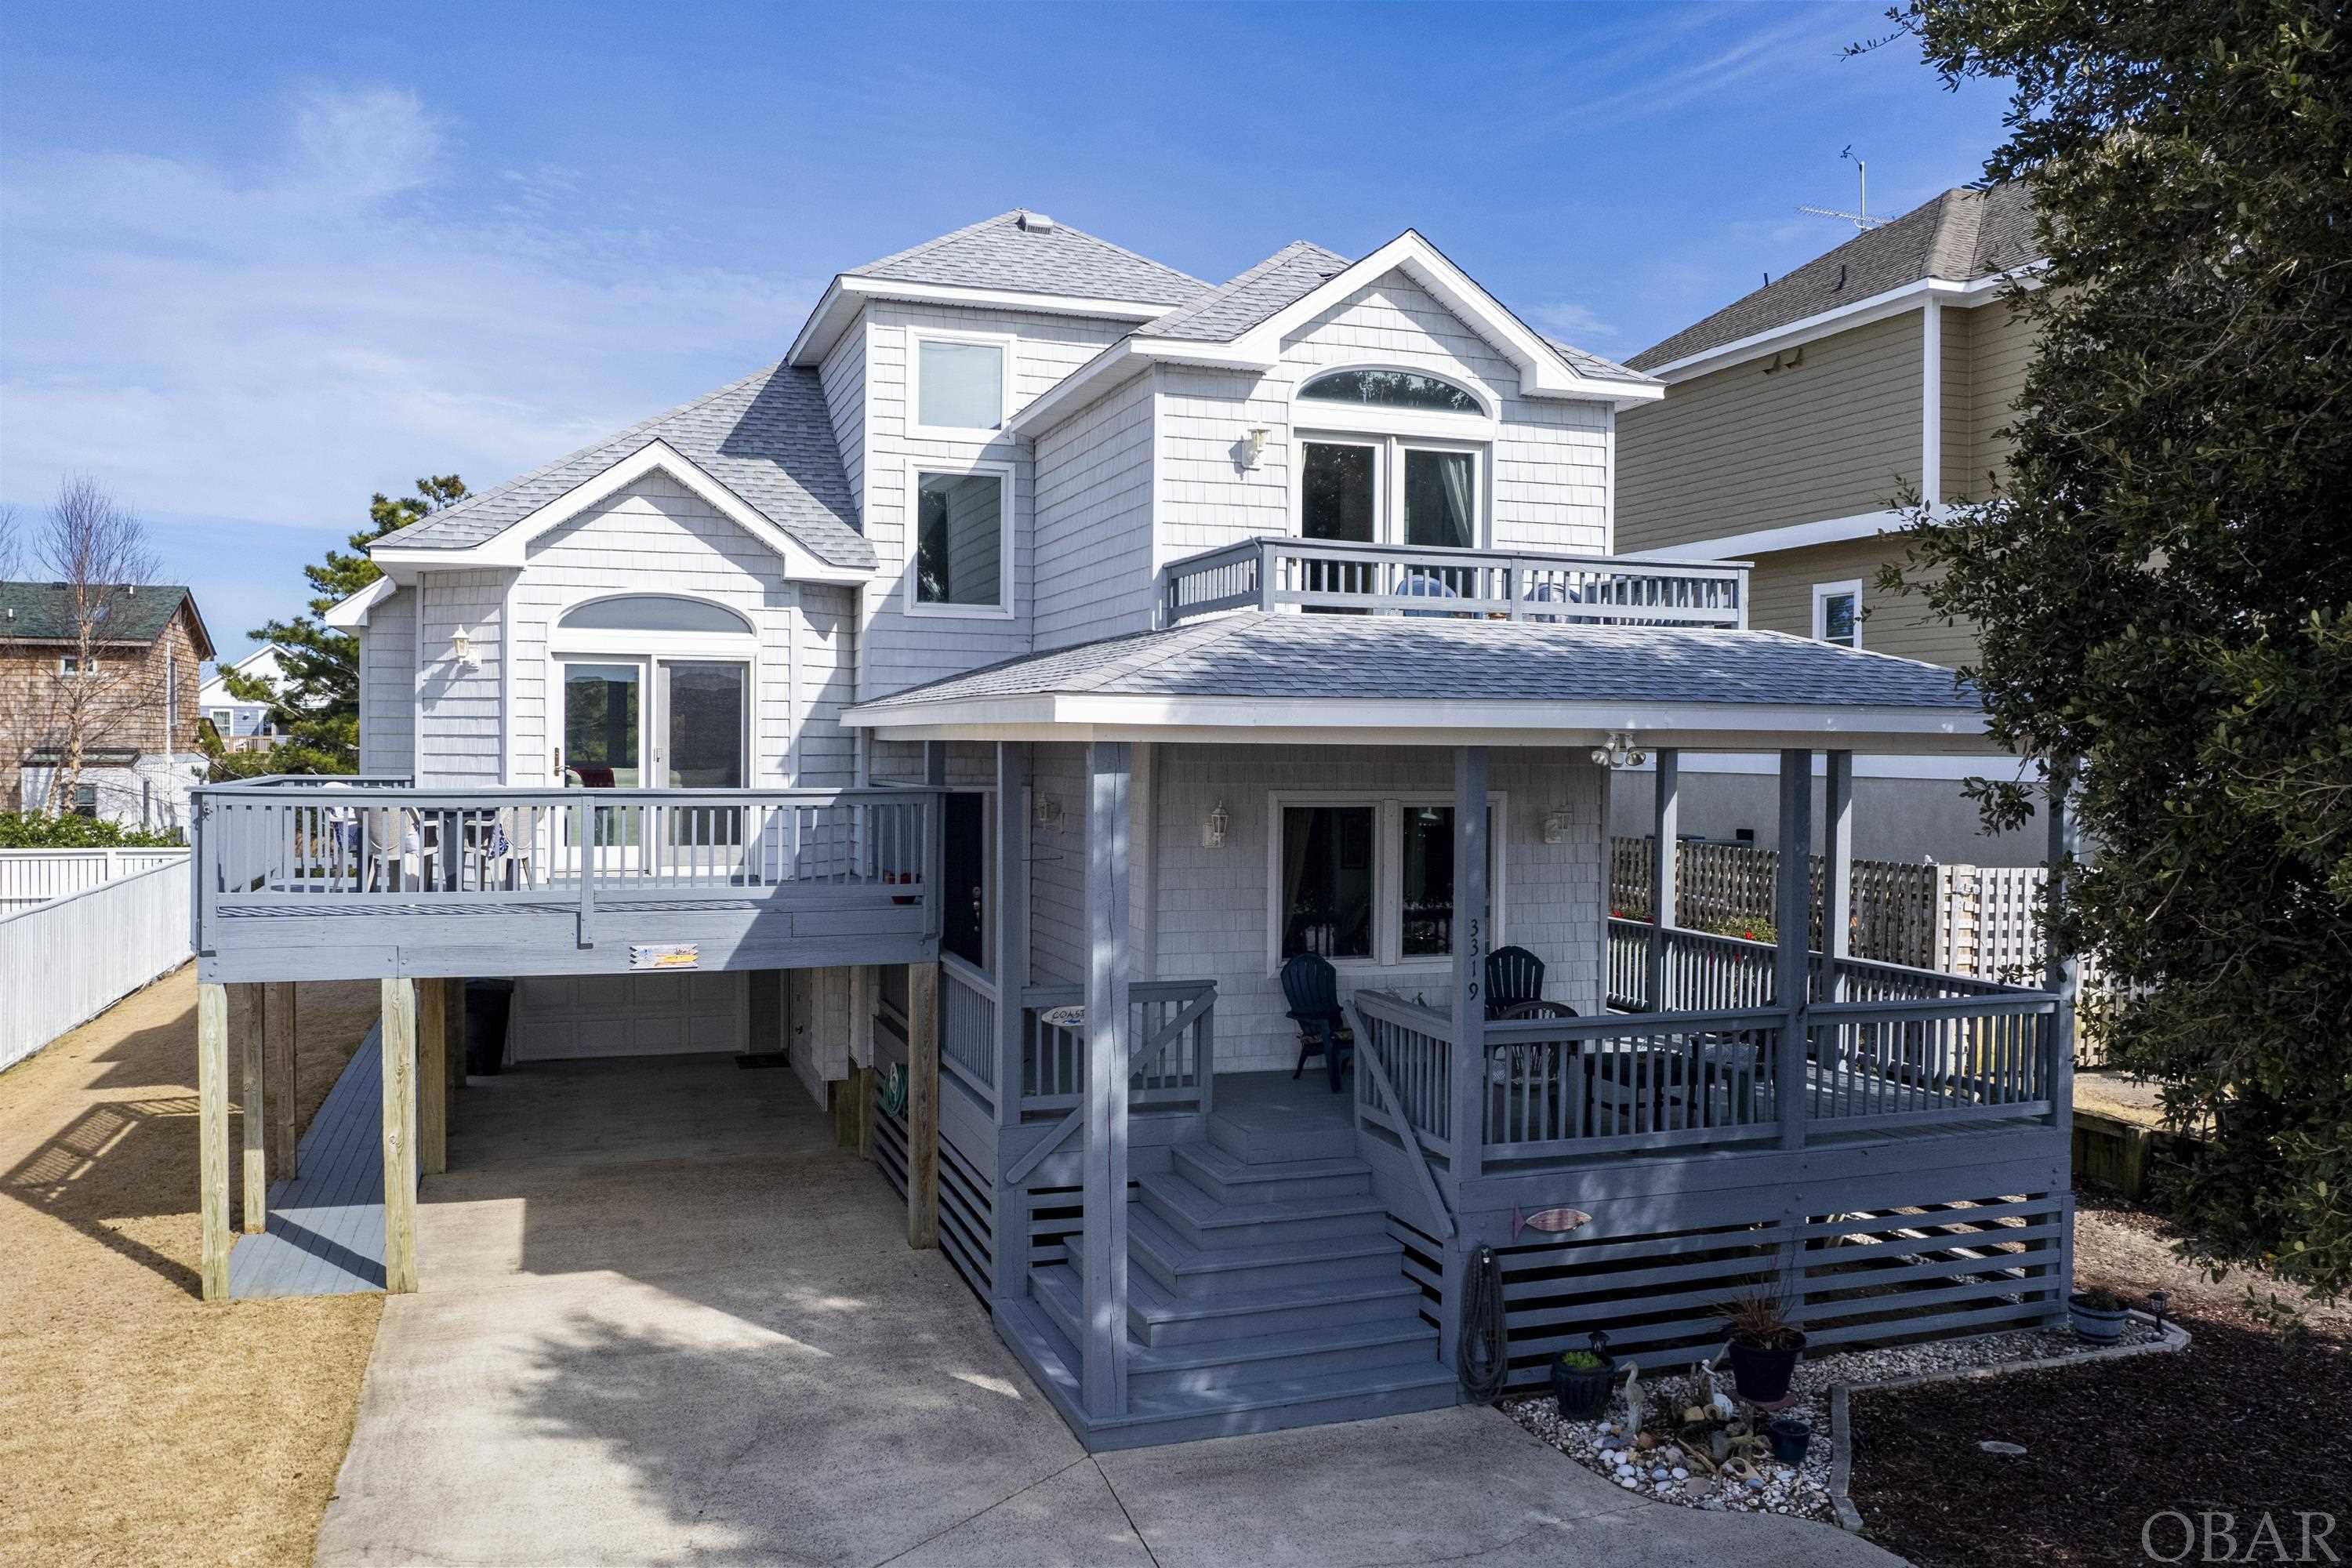 OPEN HOUSE SUNDAY 4/28, 1-3pm!!Beautiful two-story home situated on Bay Drive, awaiting picturesque sunsets!  Views of lovely Kitty Hawk Bay from across-the-street sound front are just the beginning with 3319 Bay Drive.  Enter this unique multi split-level to find a spacious entry with access to built in bookshelves, storage, full bed and bath, and stairs to both utility room and main living area.  The ground floor boasts an oversized laundry room with washer/dryer, utility sink, full sized fridge and entry to the ground level patio and enclosed garage.  The backyard patio is complete with plenty of storage, enclosed outdoor shower with new plumbing, and ample shade coverage.  An immaculately landscaped yard encircles the entire home, complete with a new irrigation system!  Additional updates include a new fortified roof(2022), new water heater(2023), new dishwasher(2024), new paint on nearly all exterior doors and newly stained deck walk ways!  Septic is also permitted for additional 4th bedroom.  Stepping back upstairs to the main living area, you'll find a large open kitchen with island, granite counter tops and an abundance of cabinet space from top to bottom.  Moving from the kitchen, the main area is shared with a formal dining space large enough for full-sized table and seating for ten, and formal living room with views and access to a massive deck and open air relaxing. Also off of the main living area is a large office/study with revealing windows to the beautiful back yard landscaping and access to the back deck, offering stairs to and from the ground level patio.  The home offers two additional large bedrooms each with their own ensuite, and one with private front deck/balcony.  There's no shortage of storage space throughout, to include a top floor walk-in attic access.  A truly magnificent property you won't want to miss!!